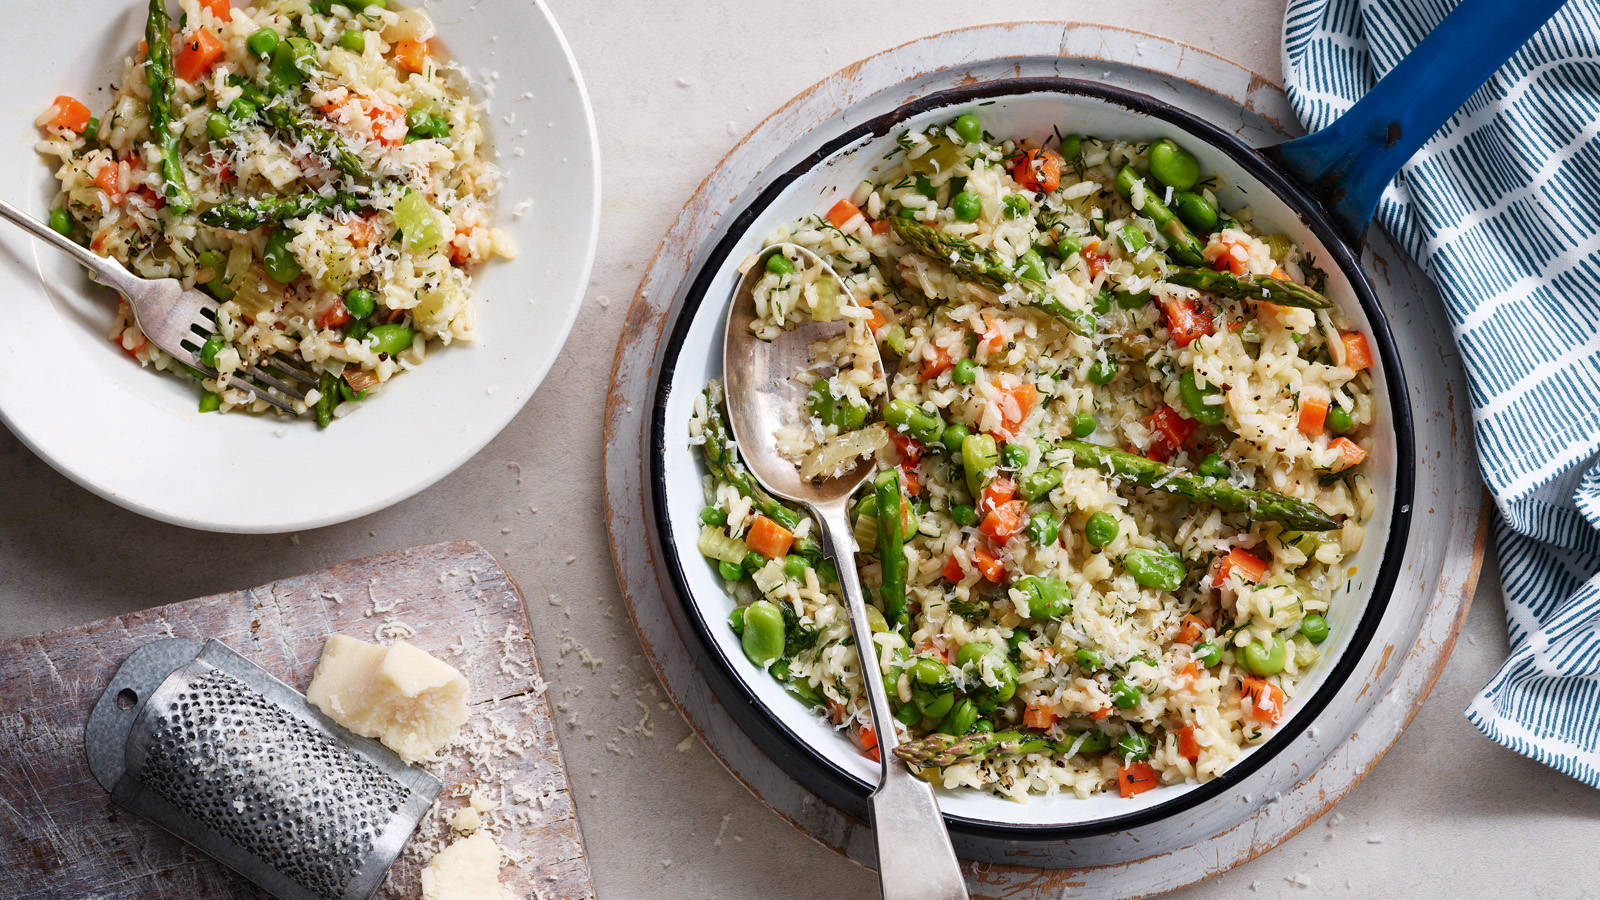 A beautifully presented risotto with fresh greens. Wallpaper